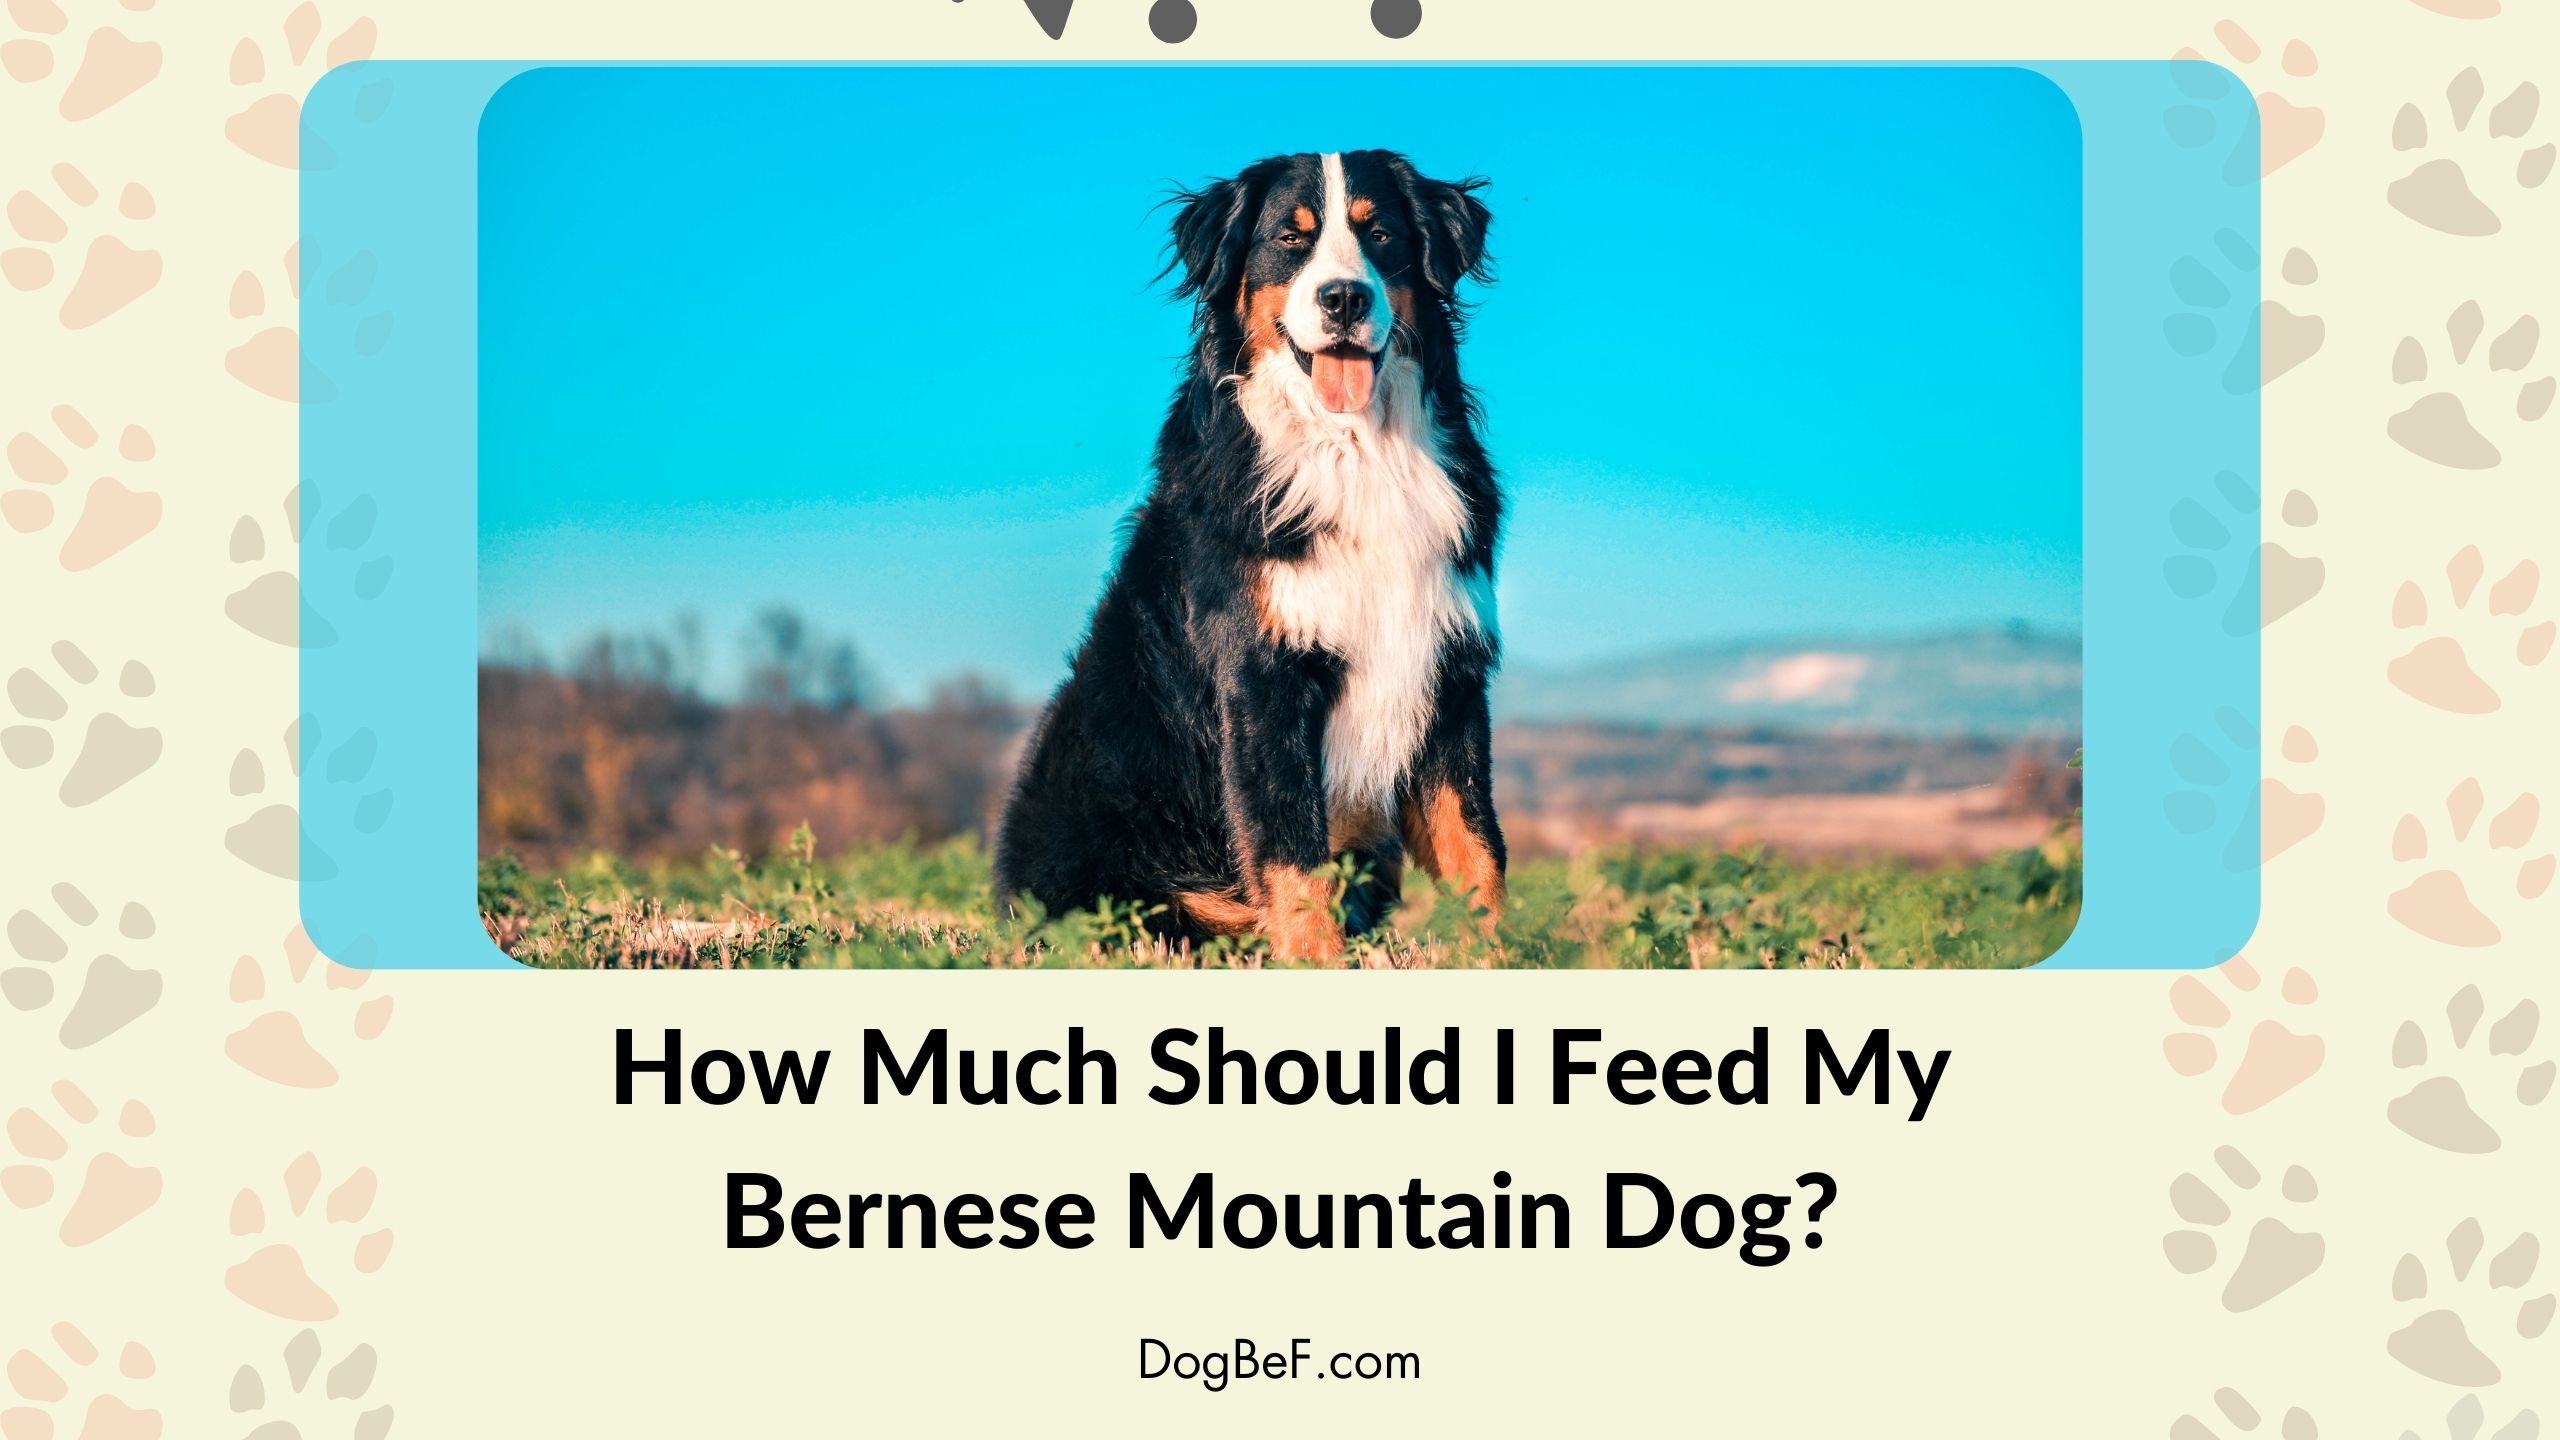 How much should I Feed my Bernese Mountain Dog